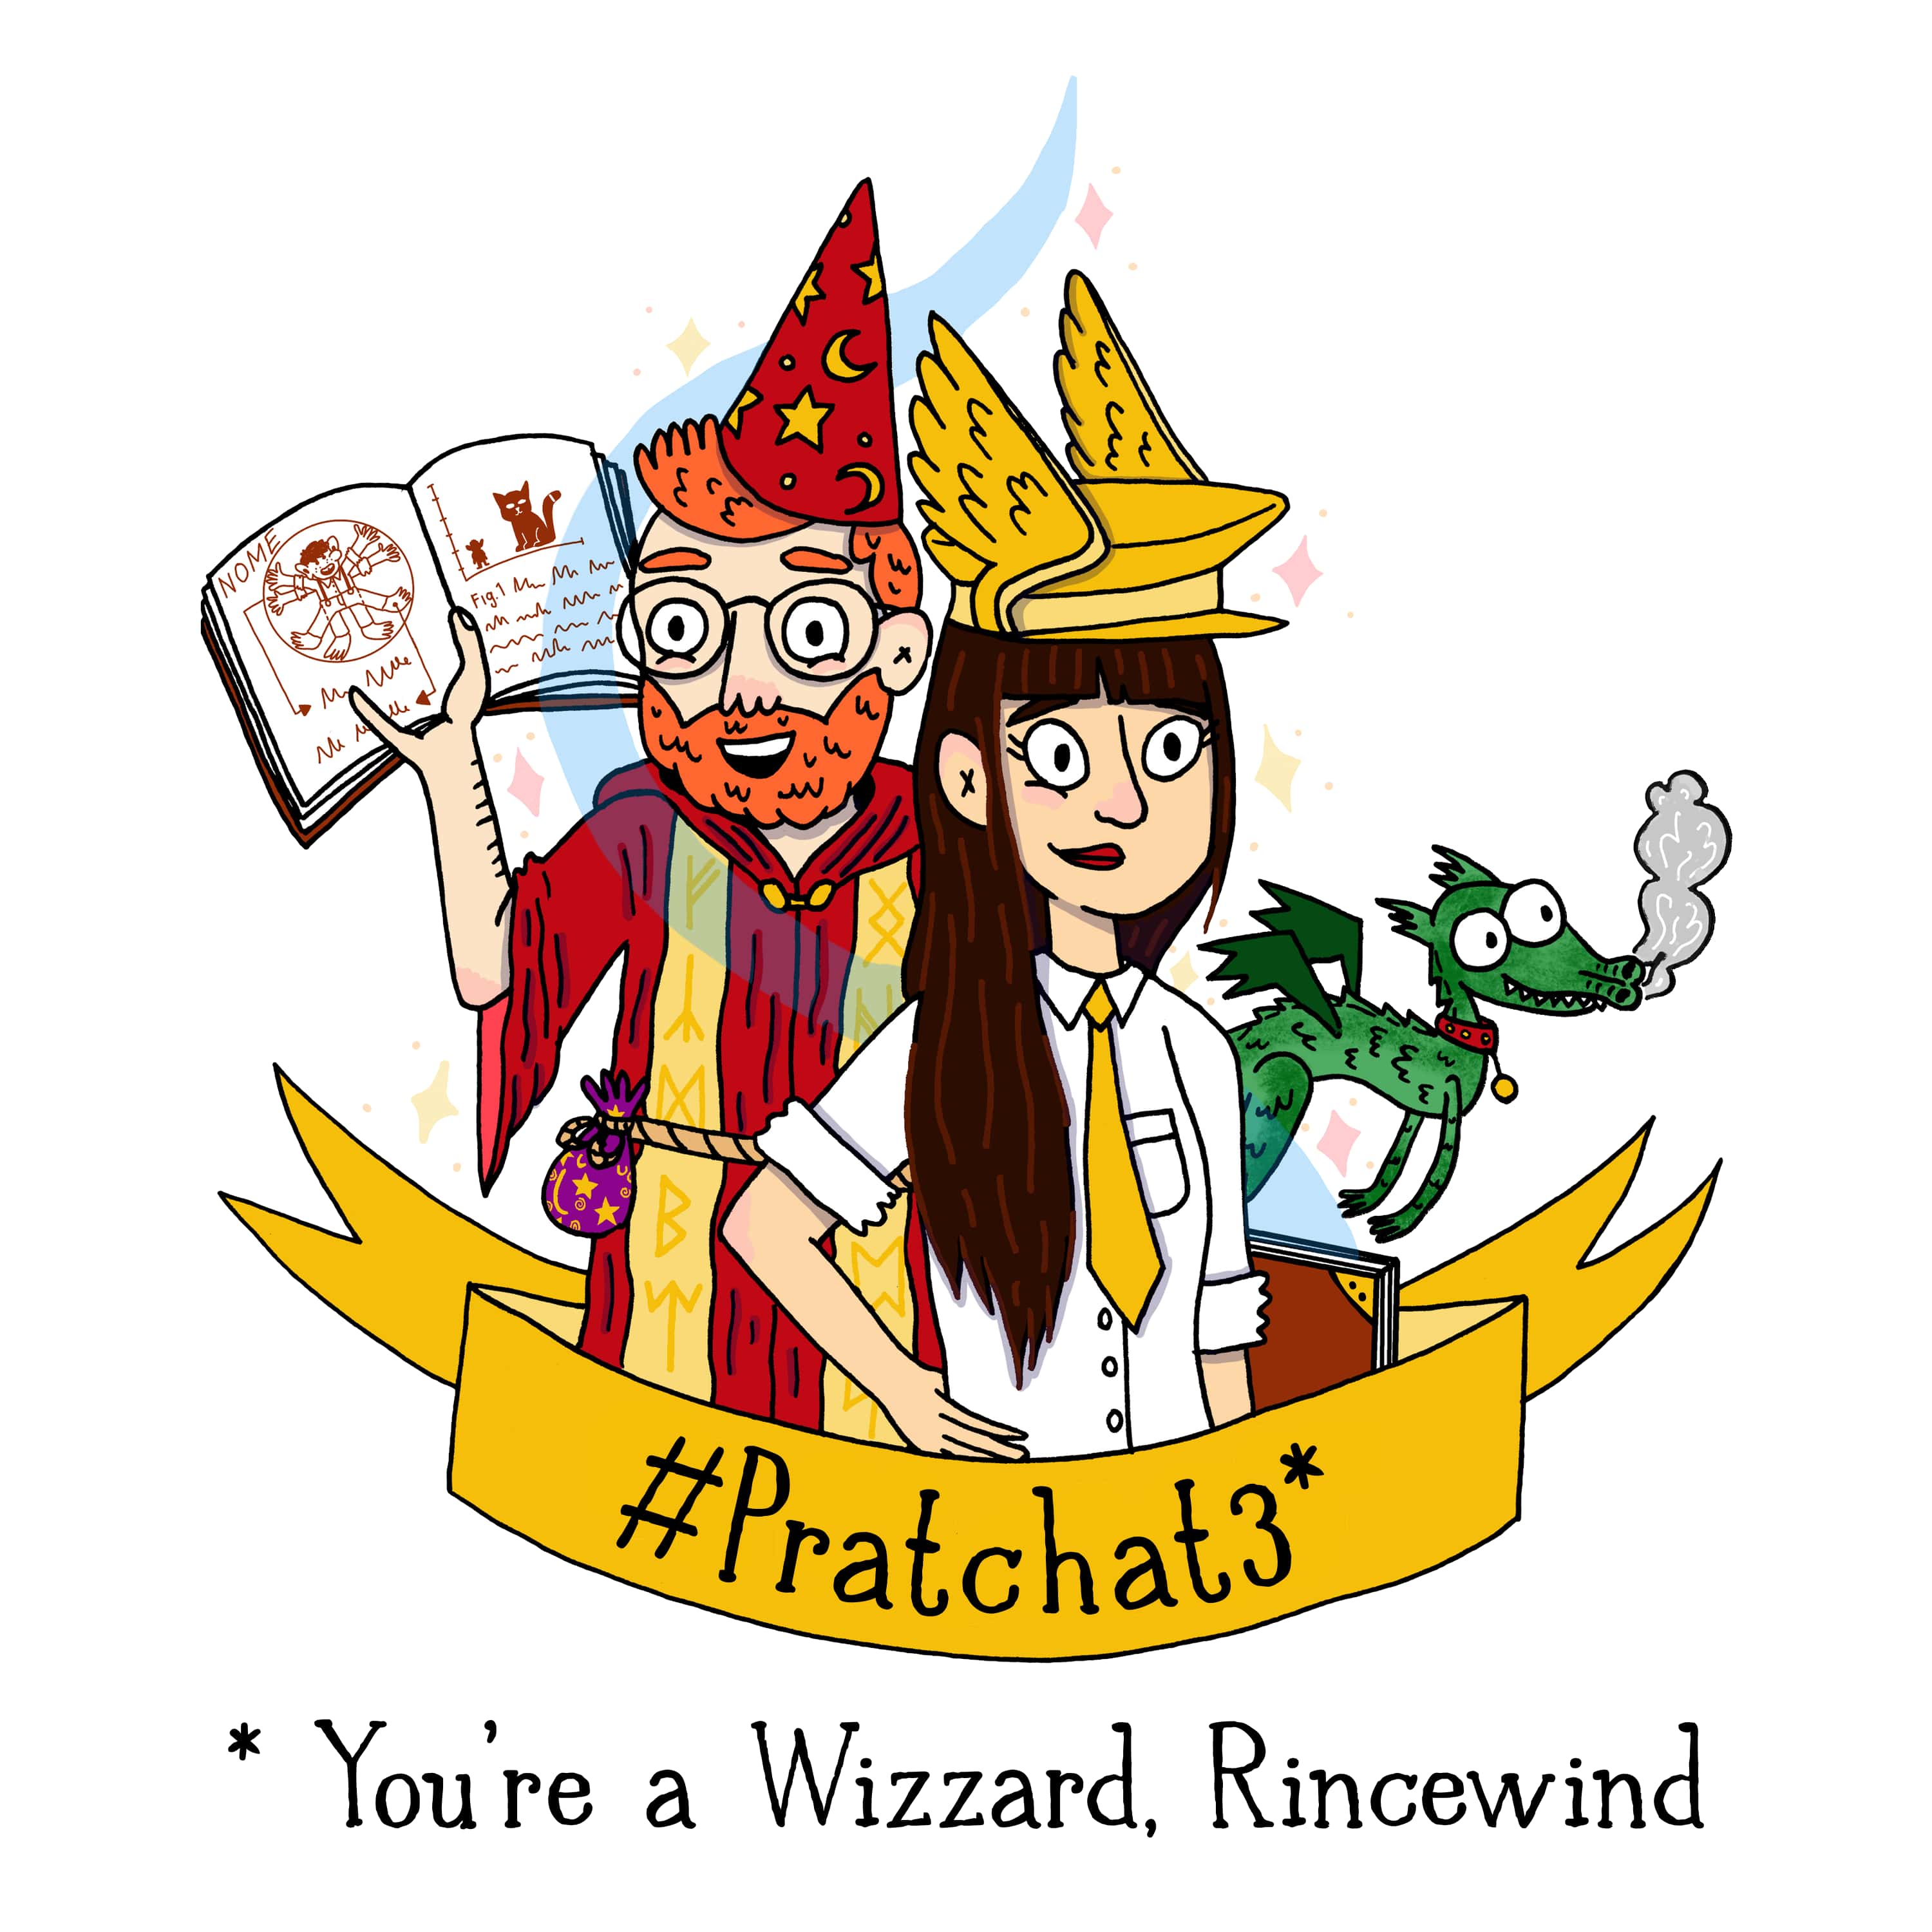 You’re a Wizzard, Rincewind (Sourcery)